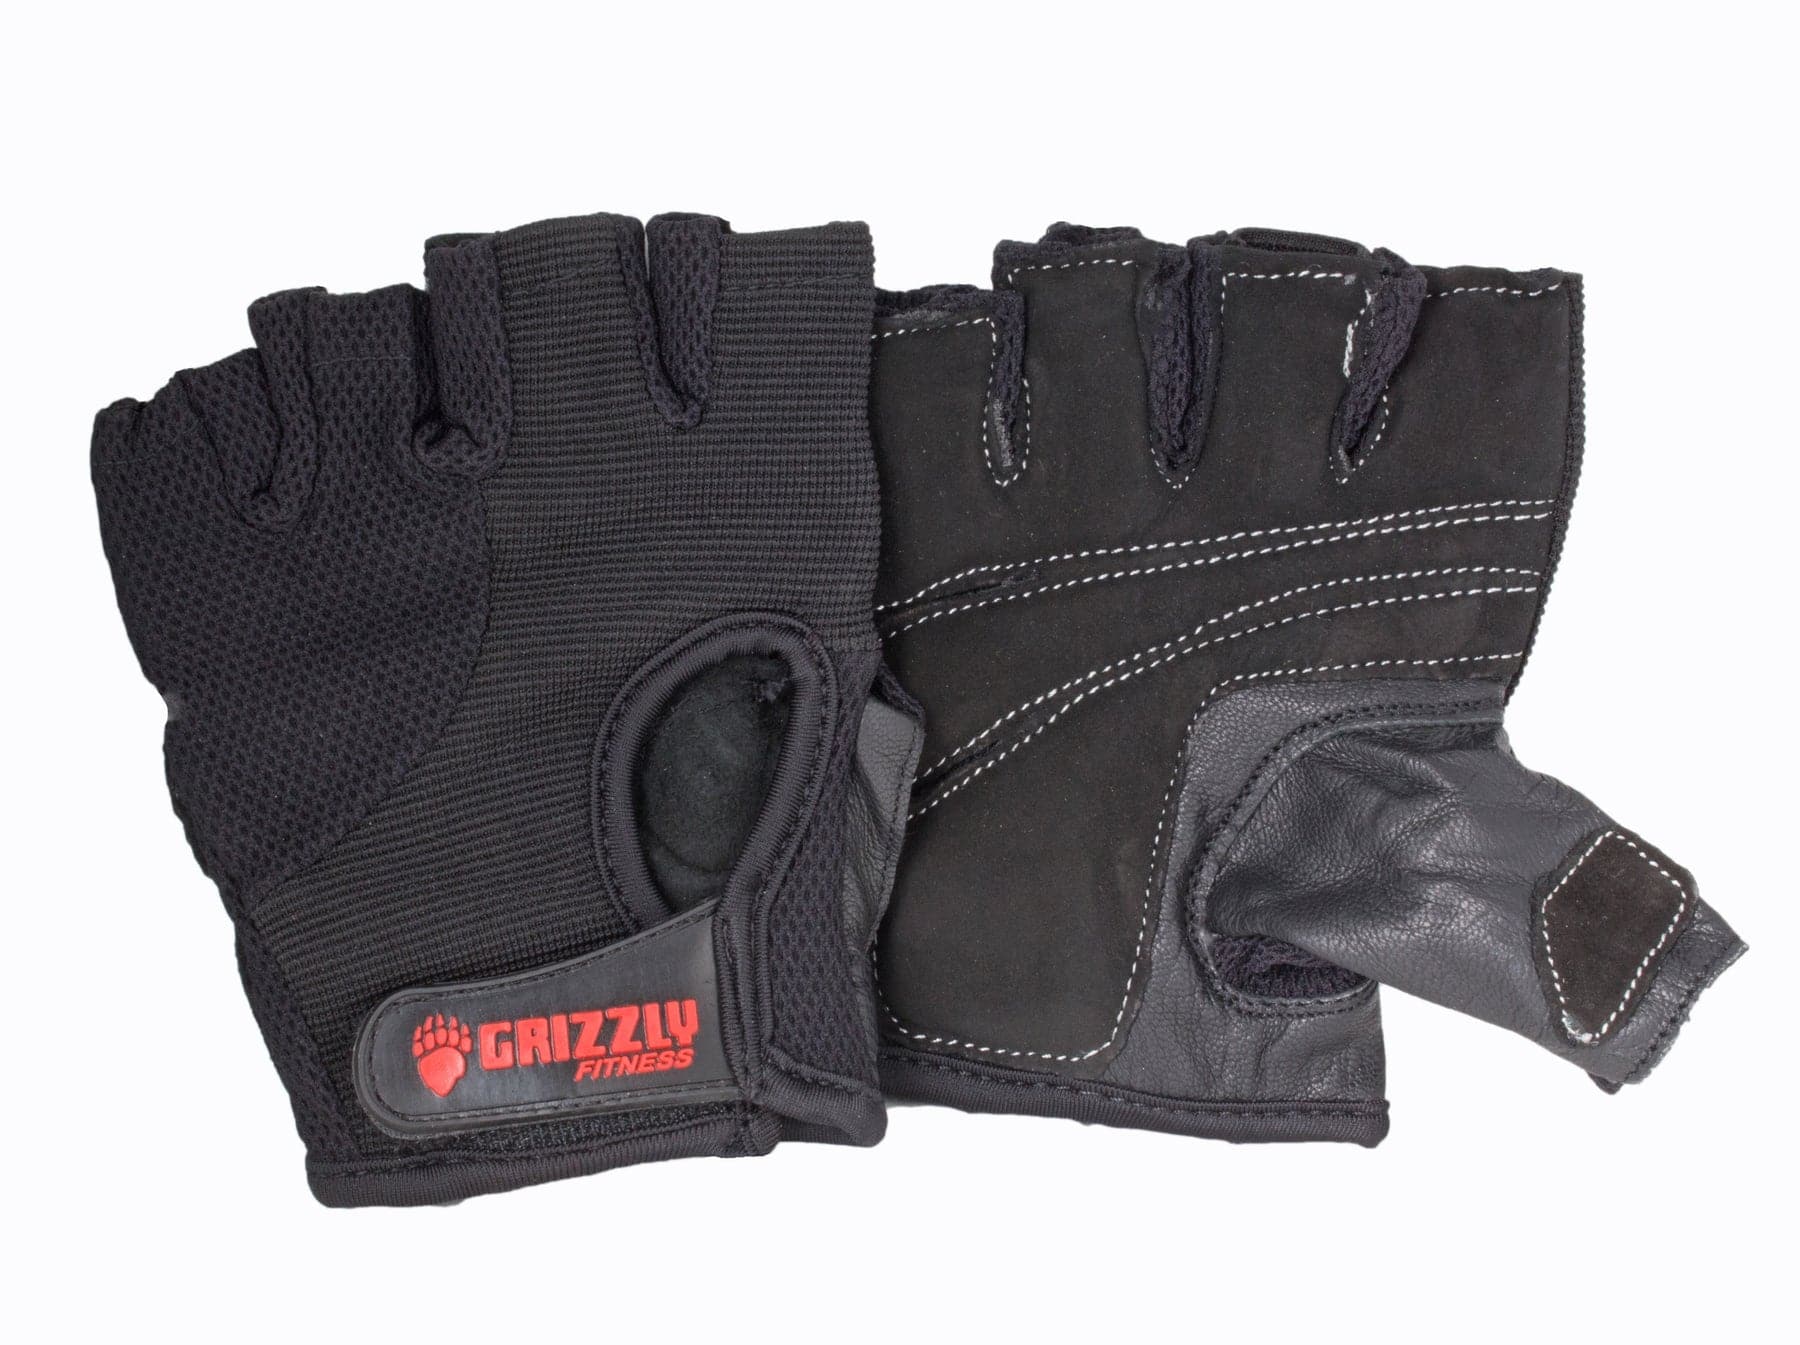 Grizzly Fitness Ignite Lifting and Training Gloves | Men and Women Sizes | Extra Durable and Flexible